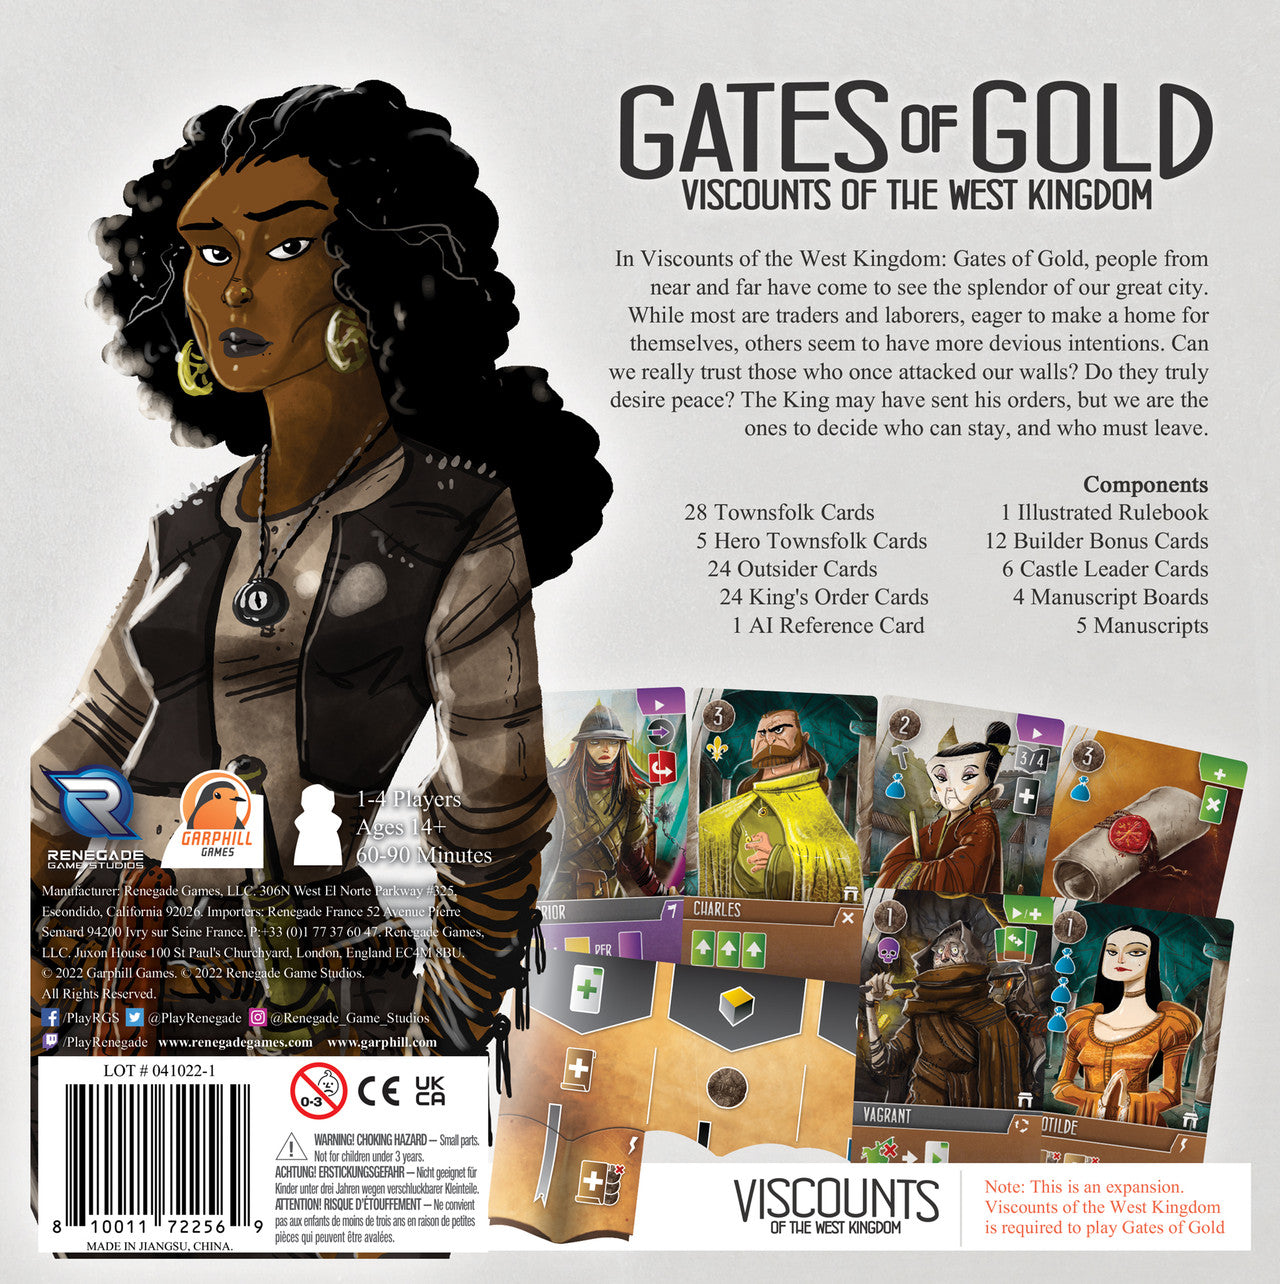 Viscounts of the West Kingdom: Gates of Gold - [GoodMoveBG]